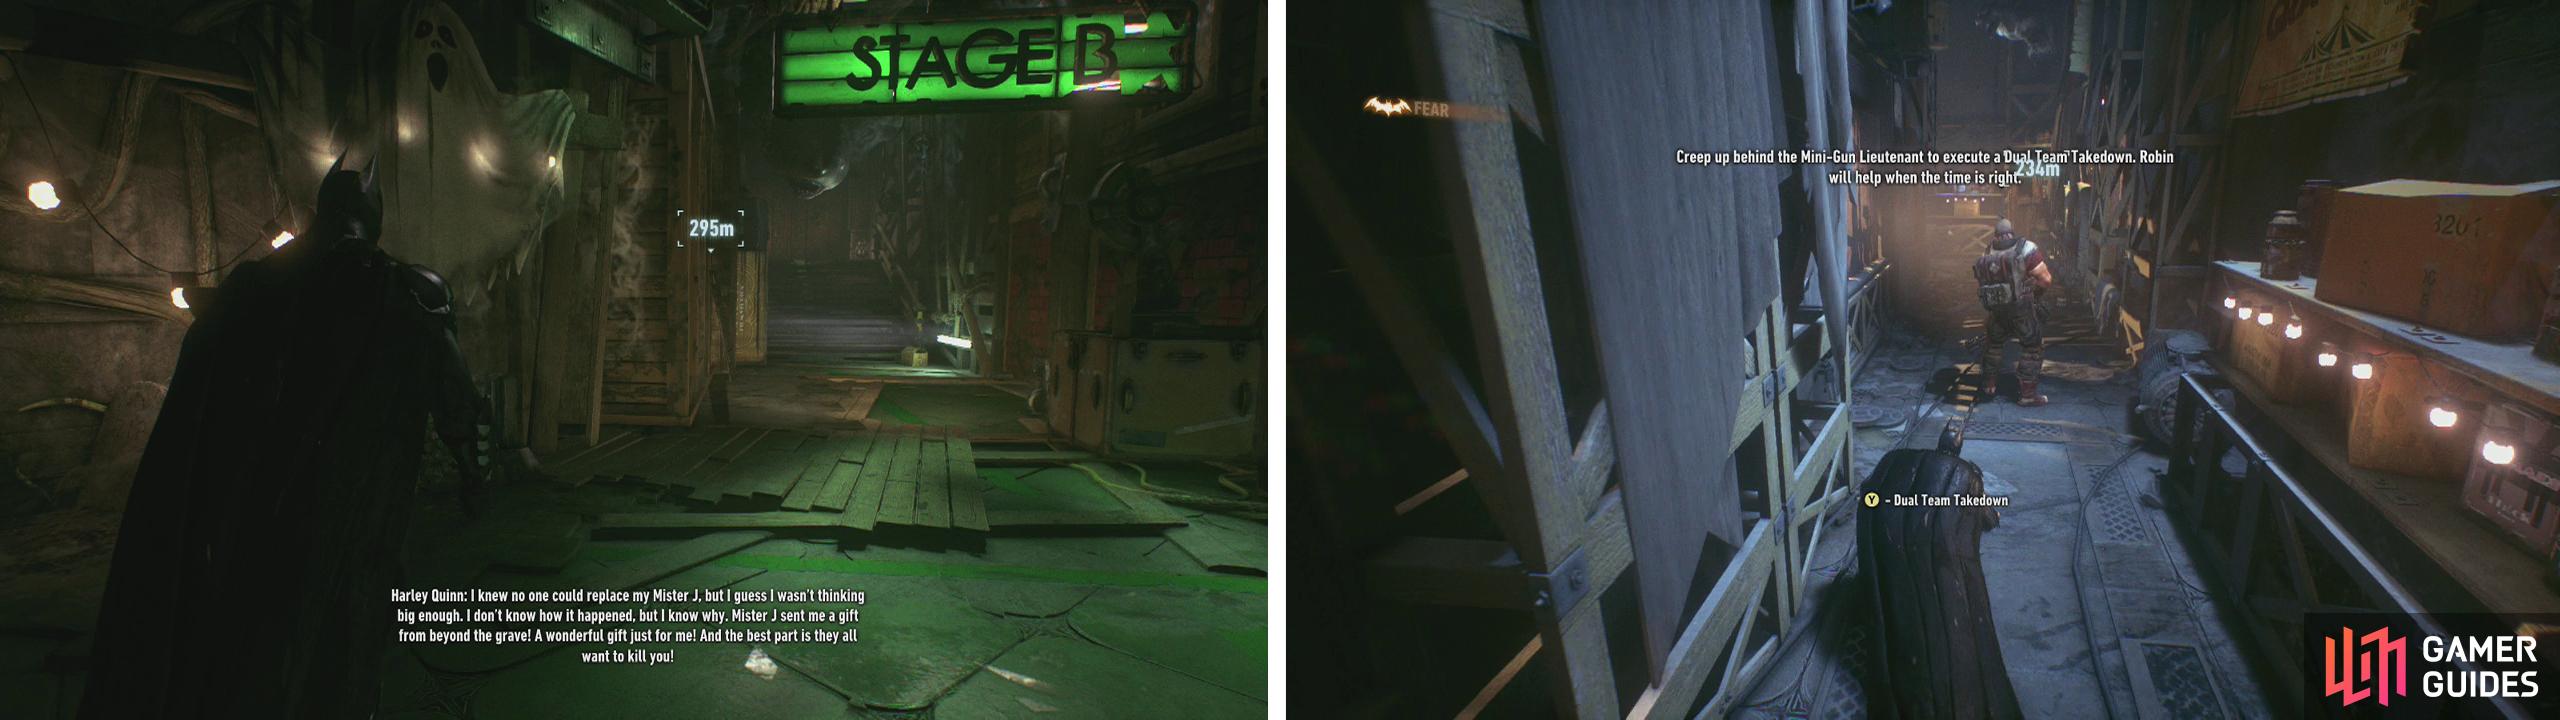 Enter Stage C first (left). Sneak up behind the Minigunner and perform a dual takedown (right).